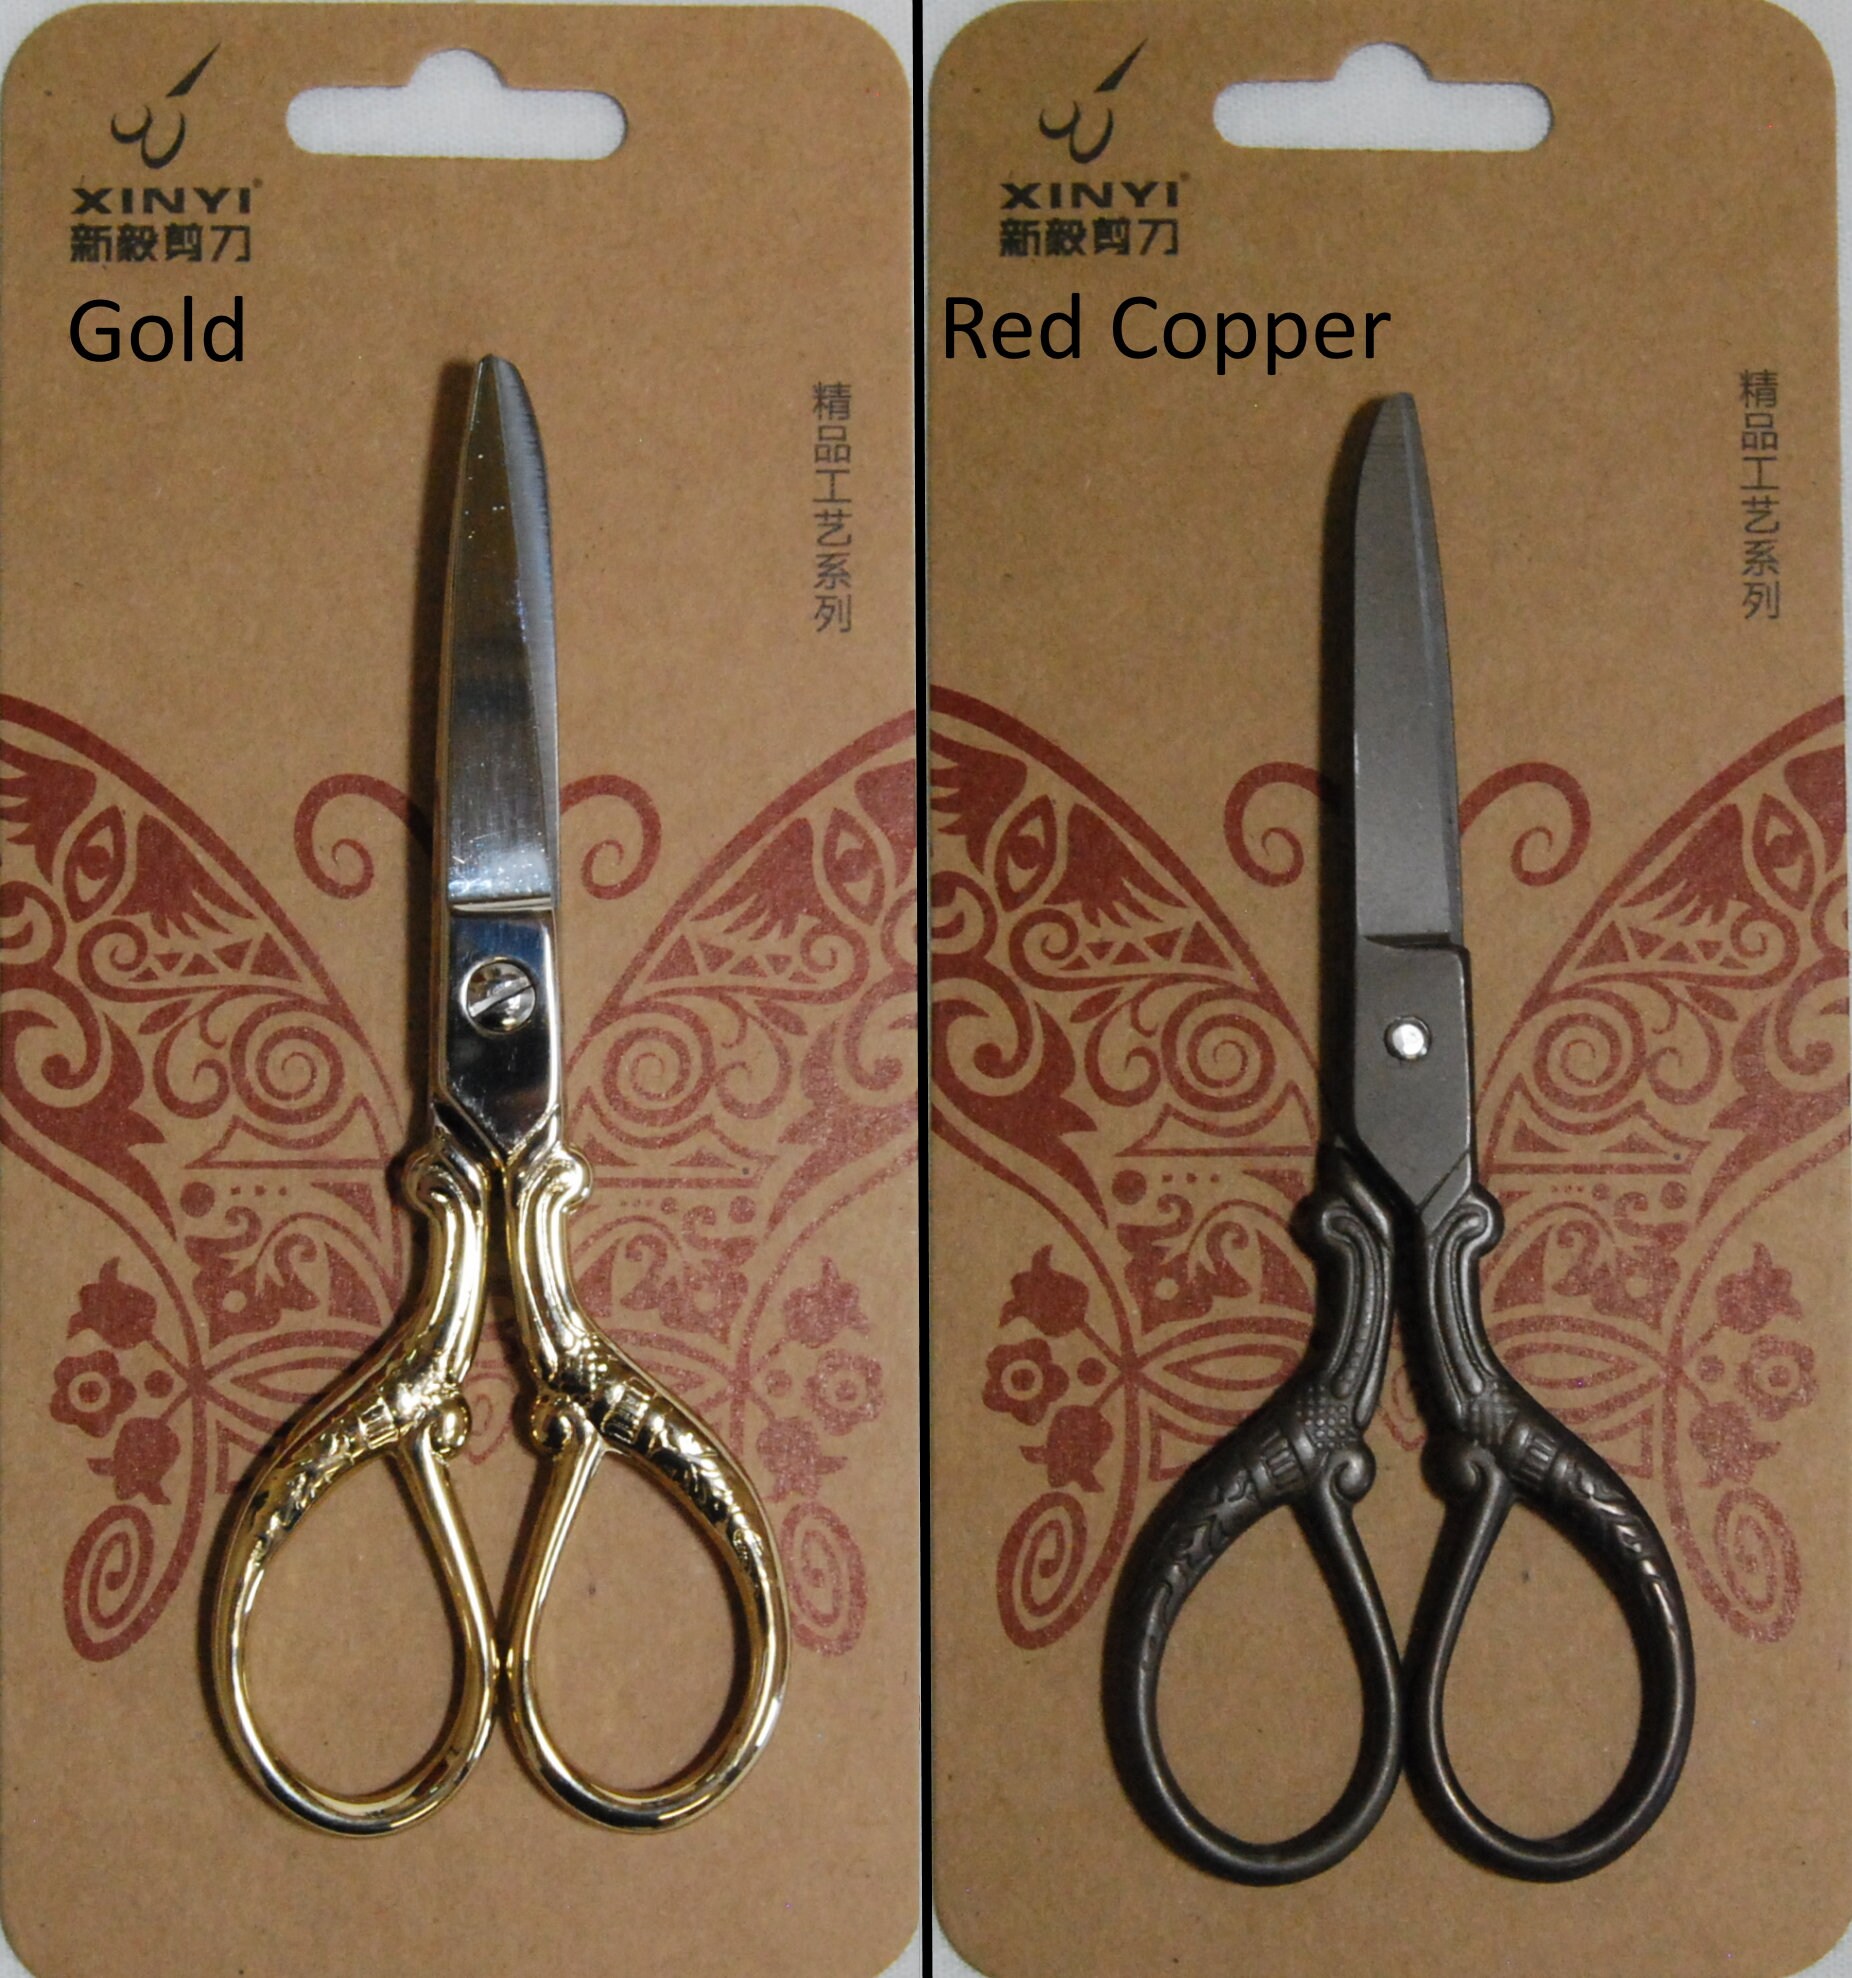 Scissors For Crafting Vintage Embroidery Scissors Set Thimbles For Sewing  Retro Style Vintage Design Sharply Point